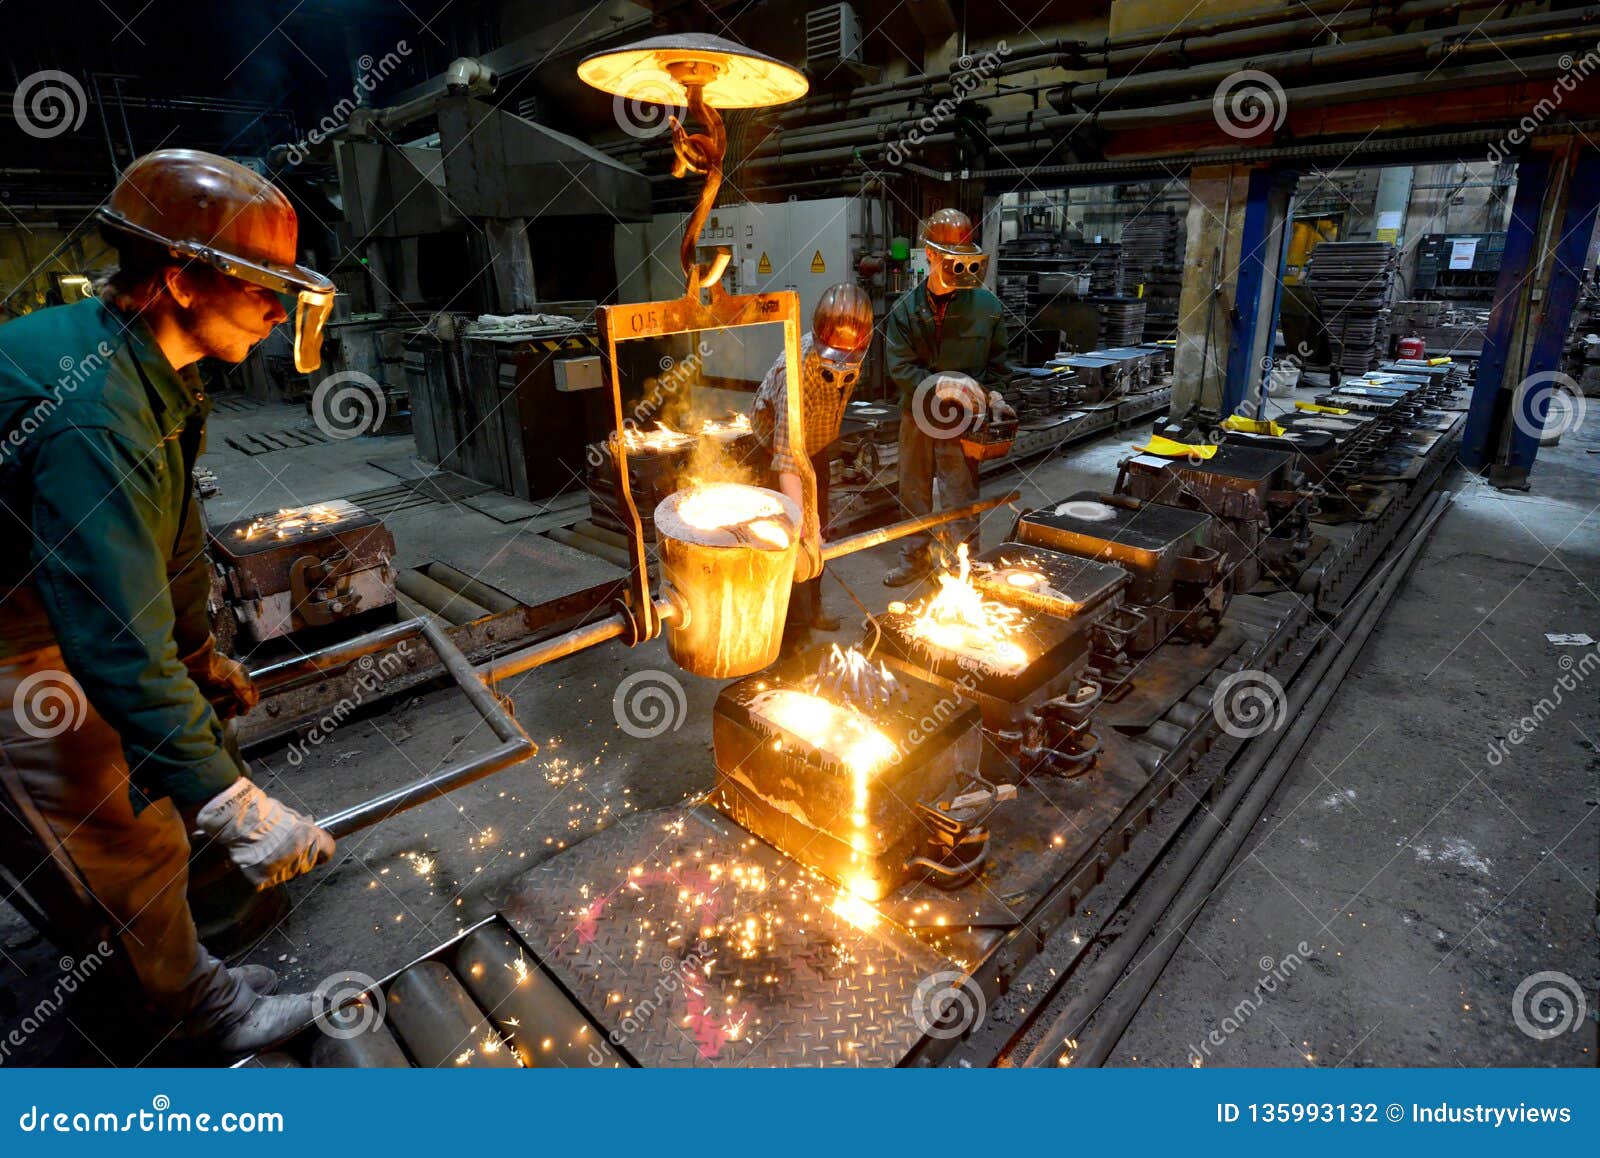 workers in a foundry casting a metal workpiece - safety at work and teamwork